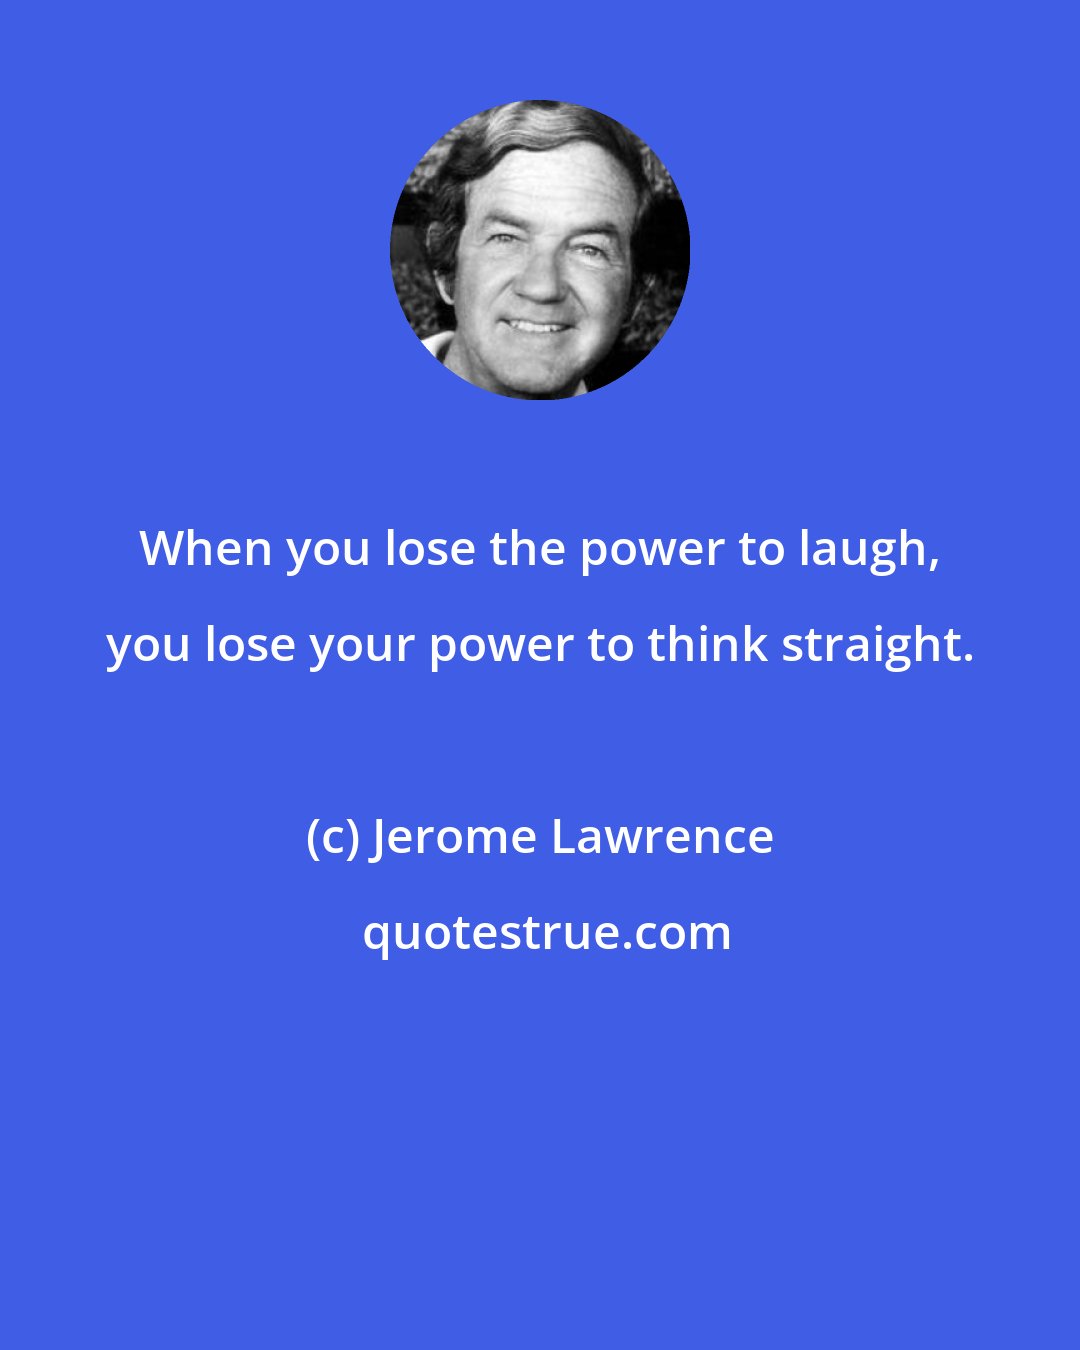 Jerome Lawrence: When you lose the power to laugh, you lose your power to think straight.